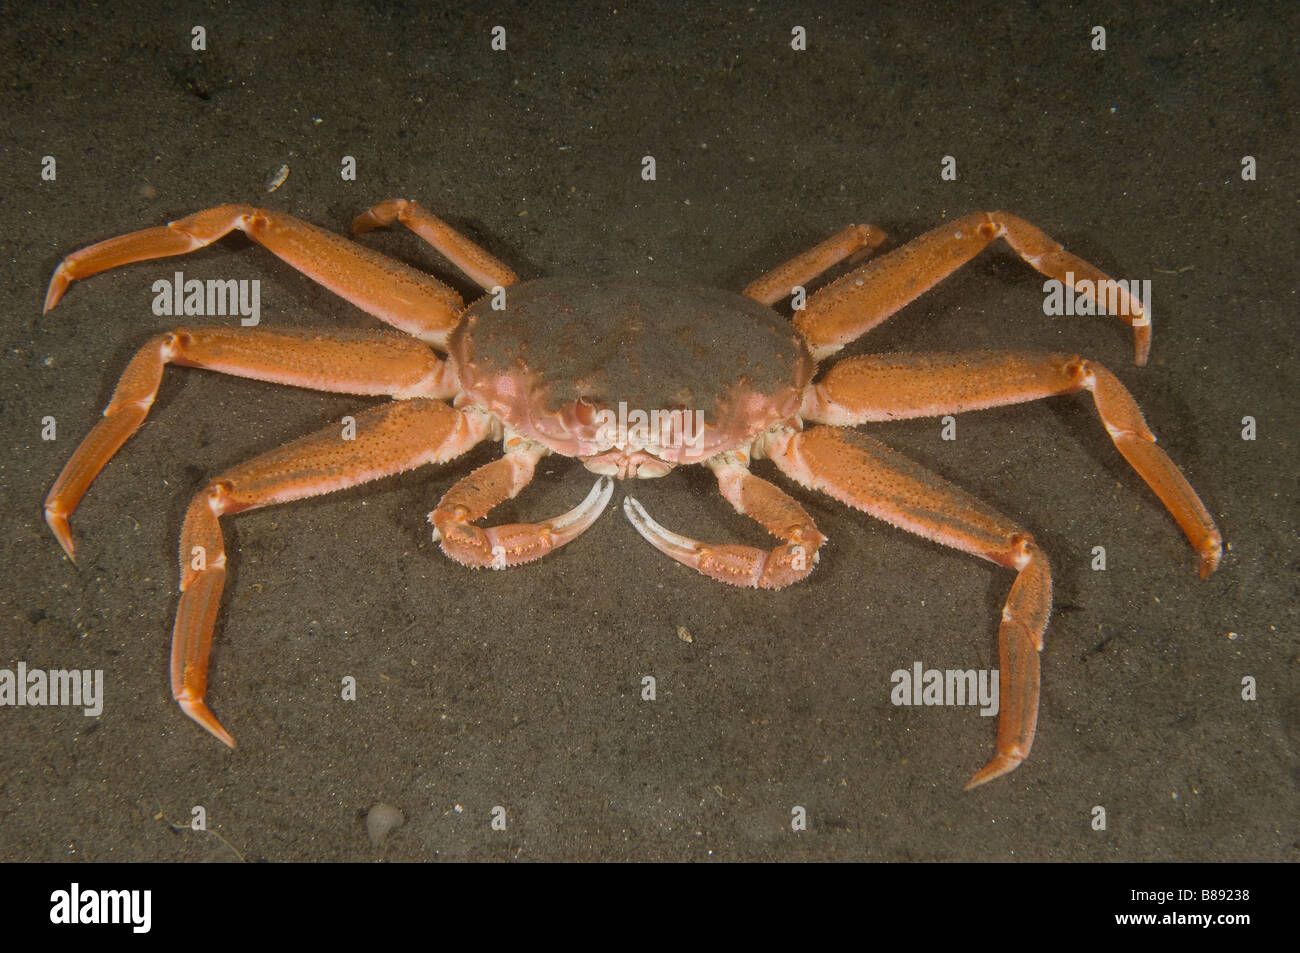 Tanner Crab or snow crab, Chionoecetes bairdi, Fishing for this species is the focus of the TV series Deadliest Catch Stock Photo